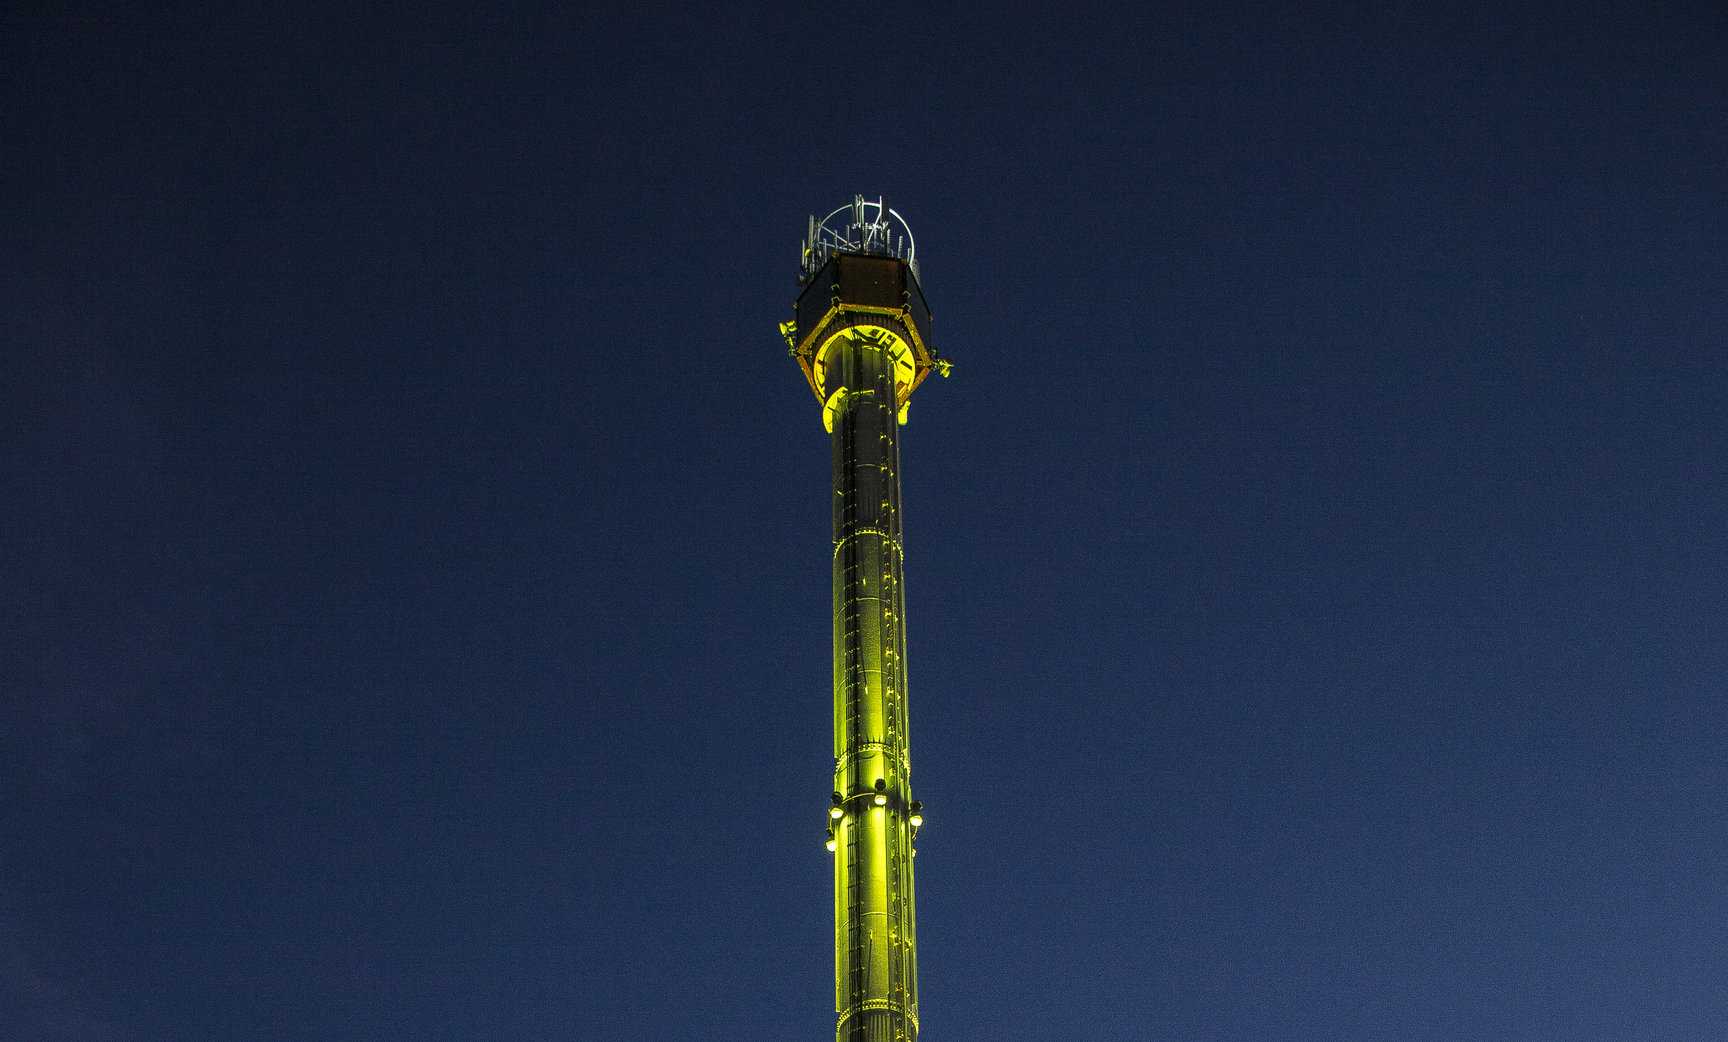 Rhyl Sky Tower - Architectural Lighting for Structures